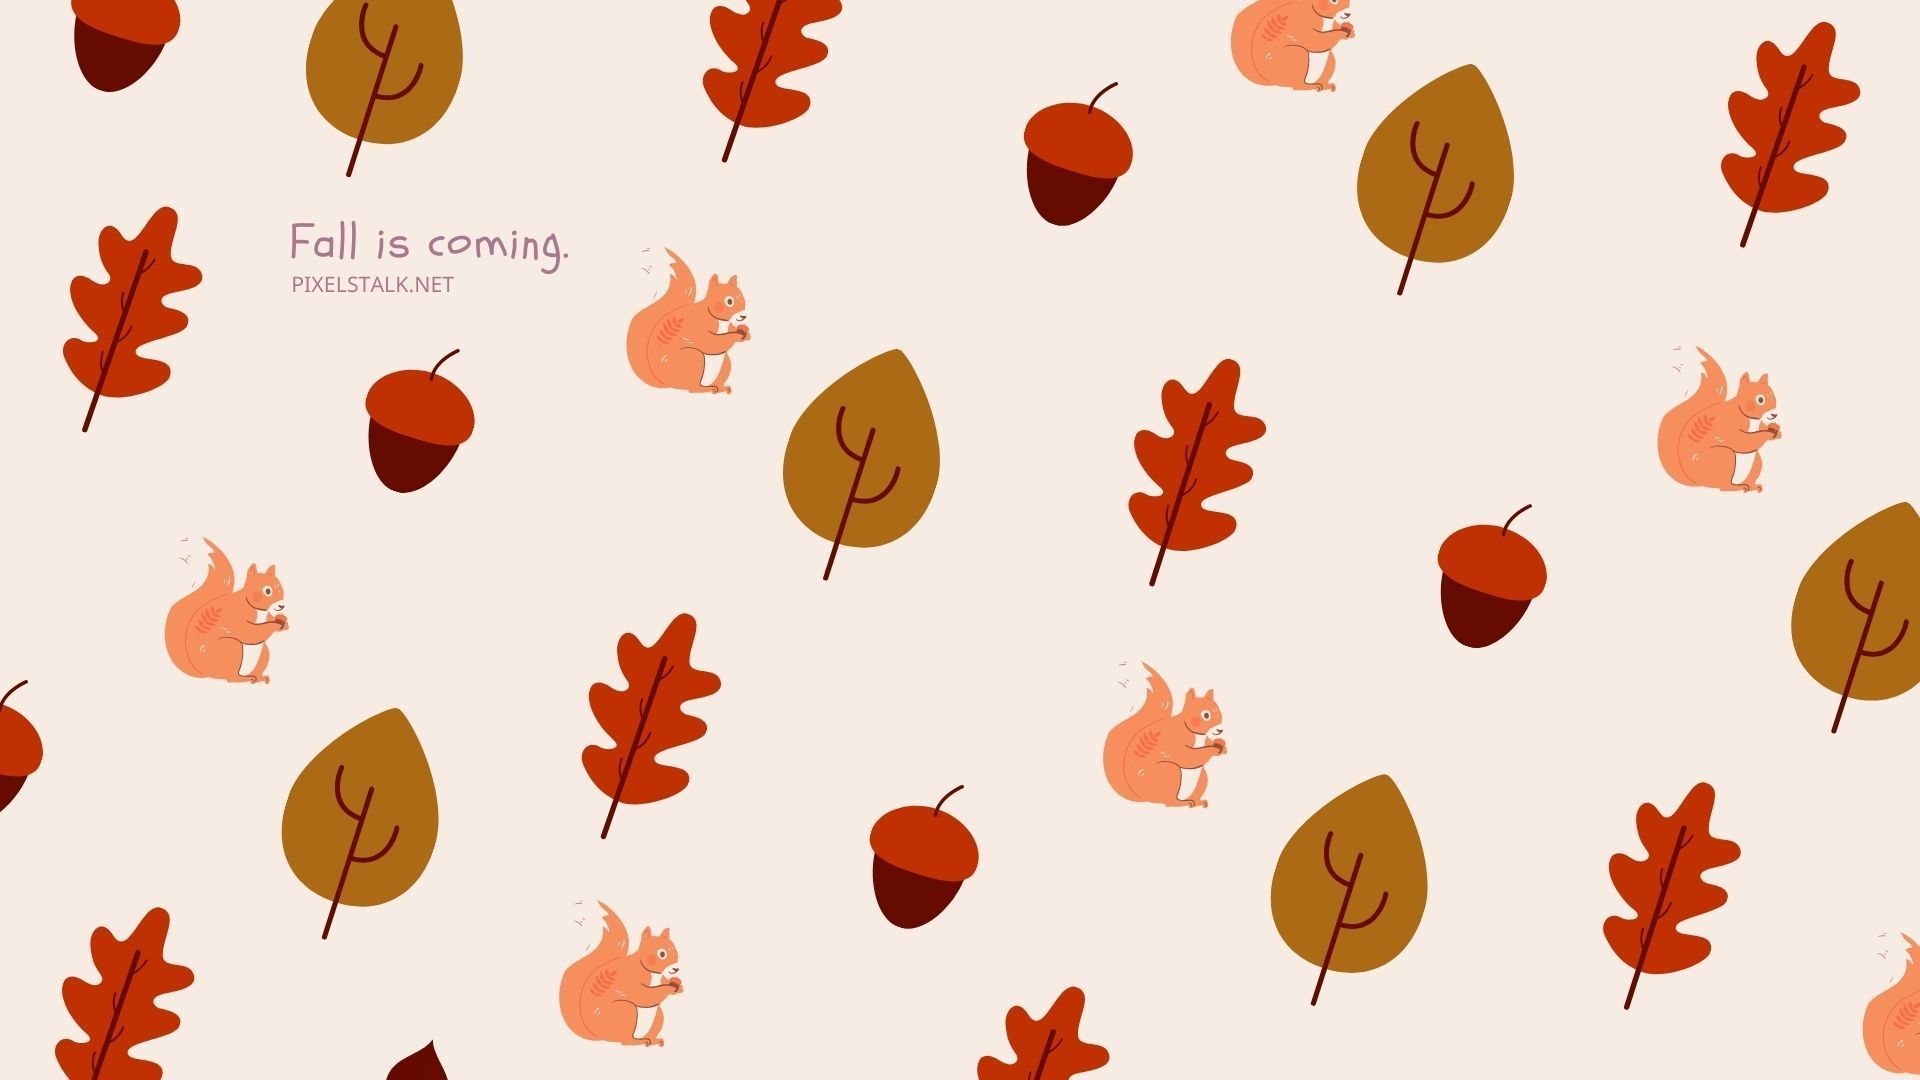 Autumn wallpaper for desktop background with a pattern of squirrels, acorns, and fall leaves - Cute fall